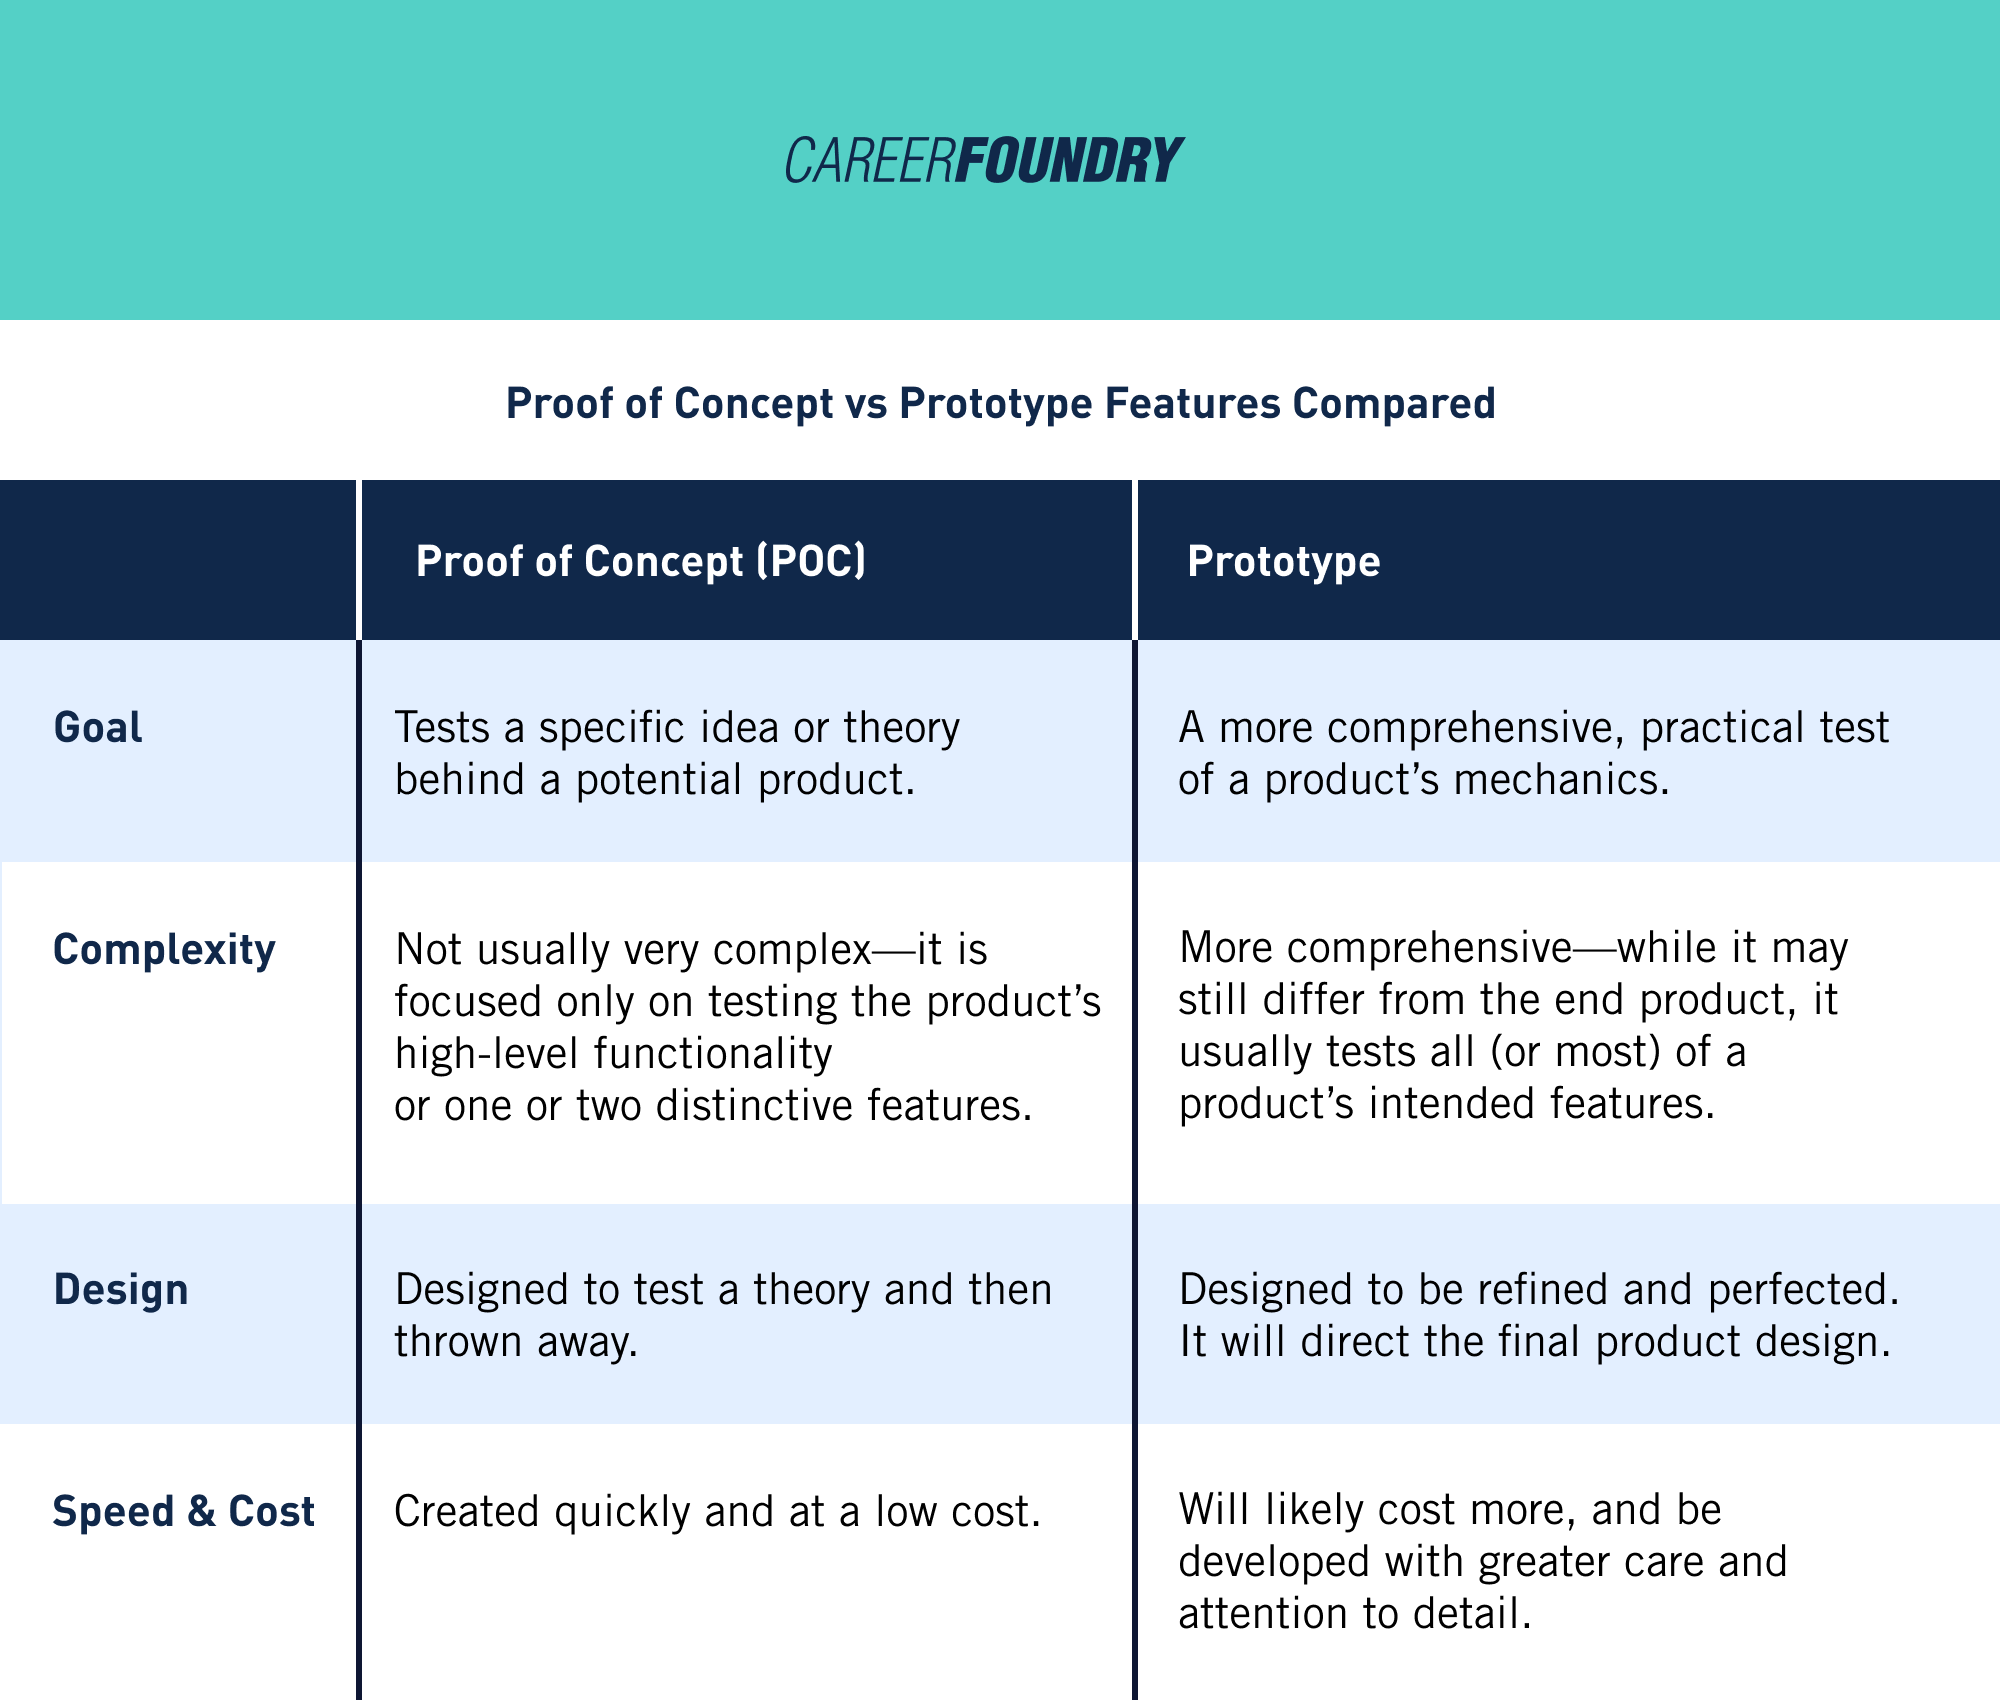 A table comparing the Proof of Concept and Prototype.